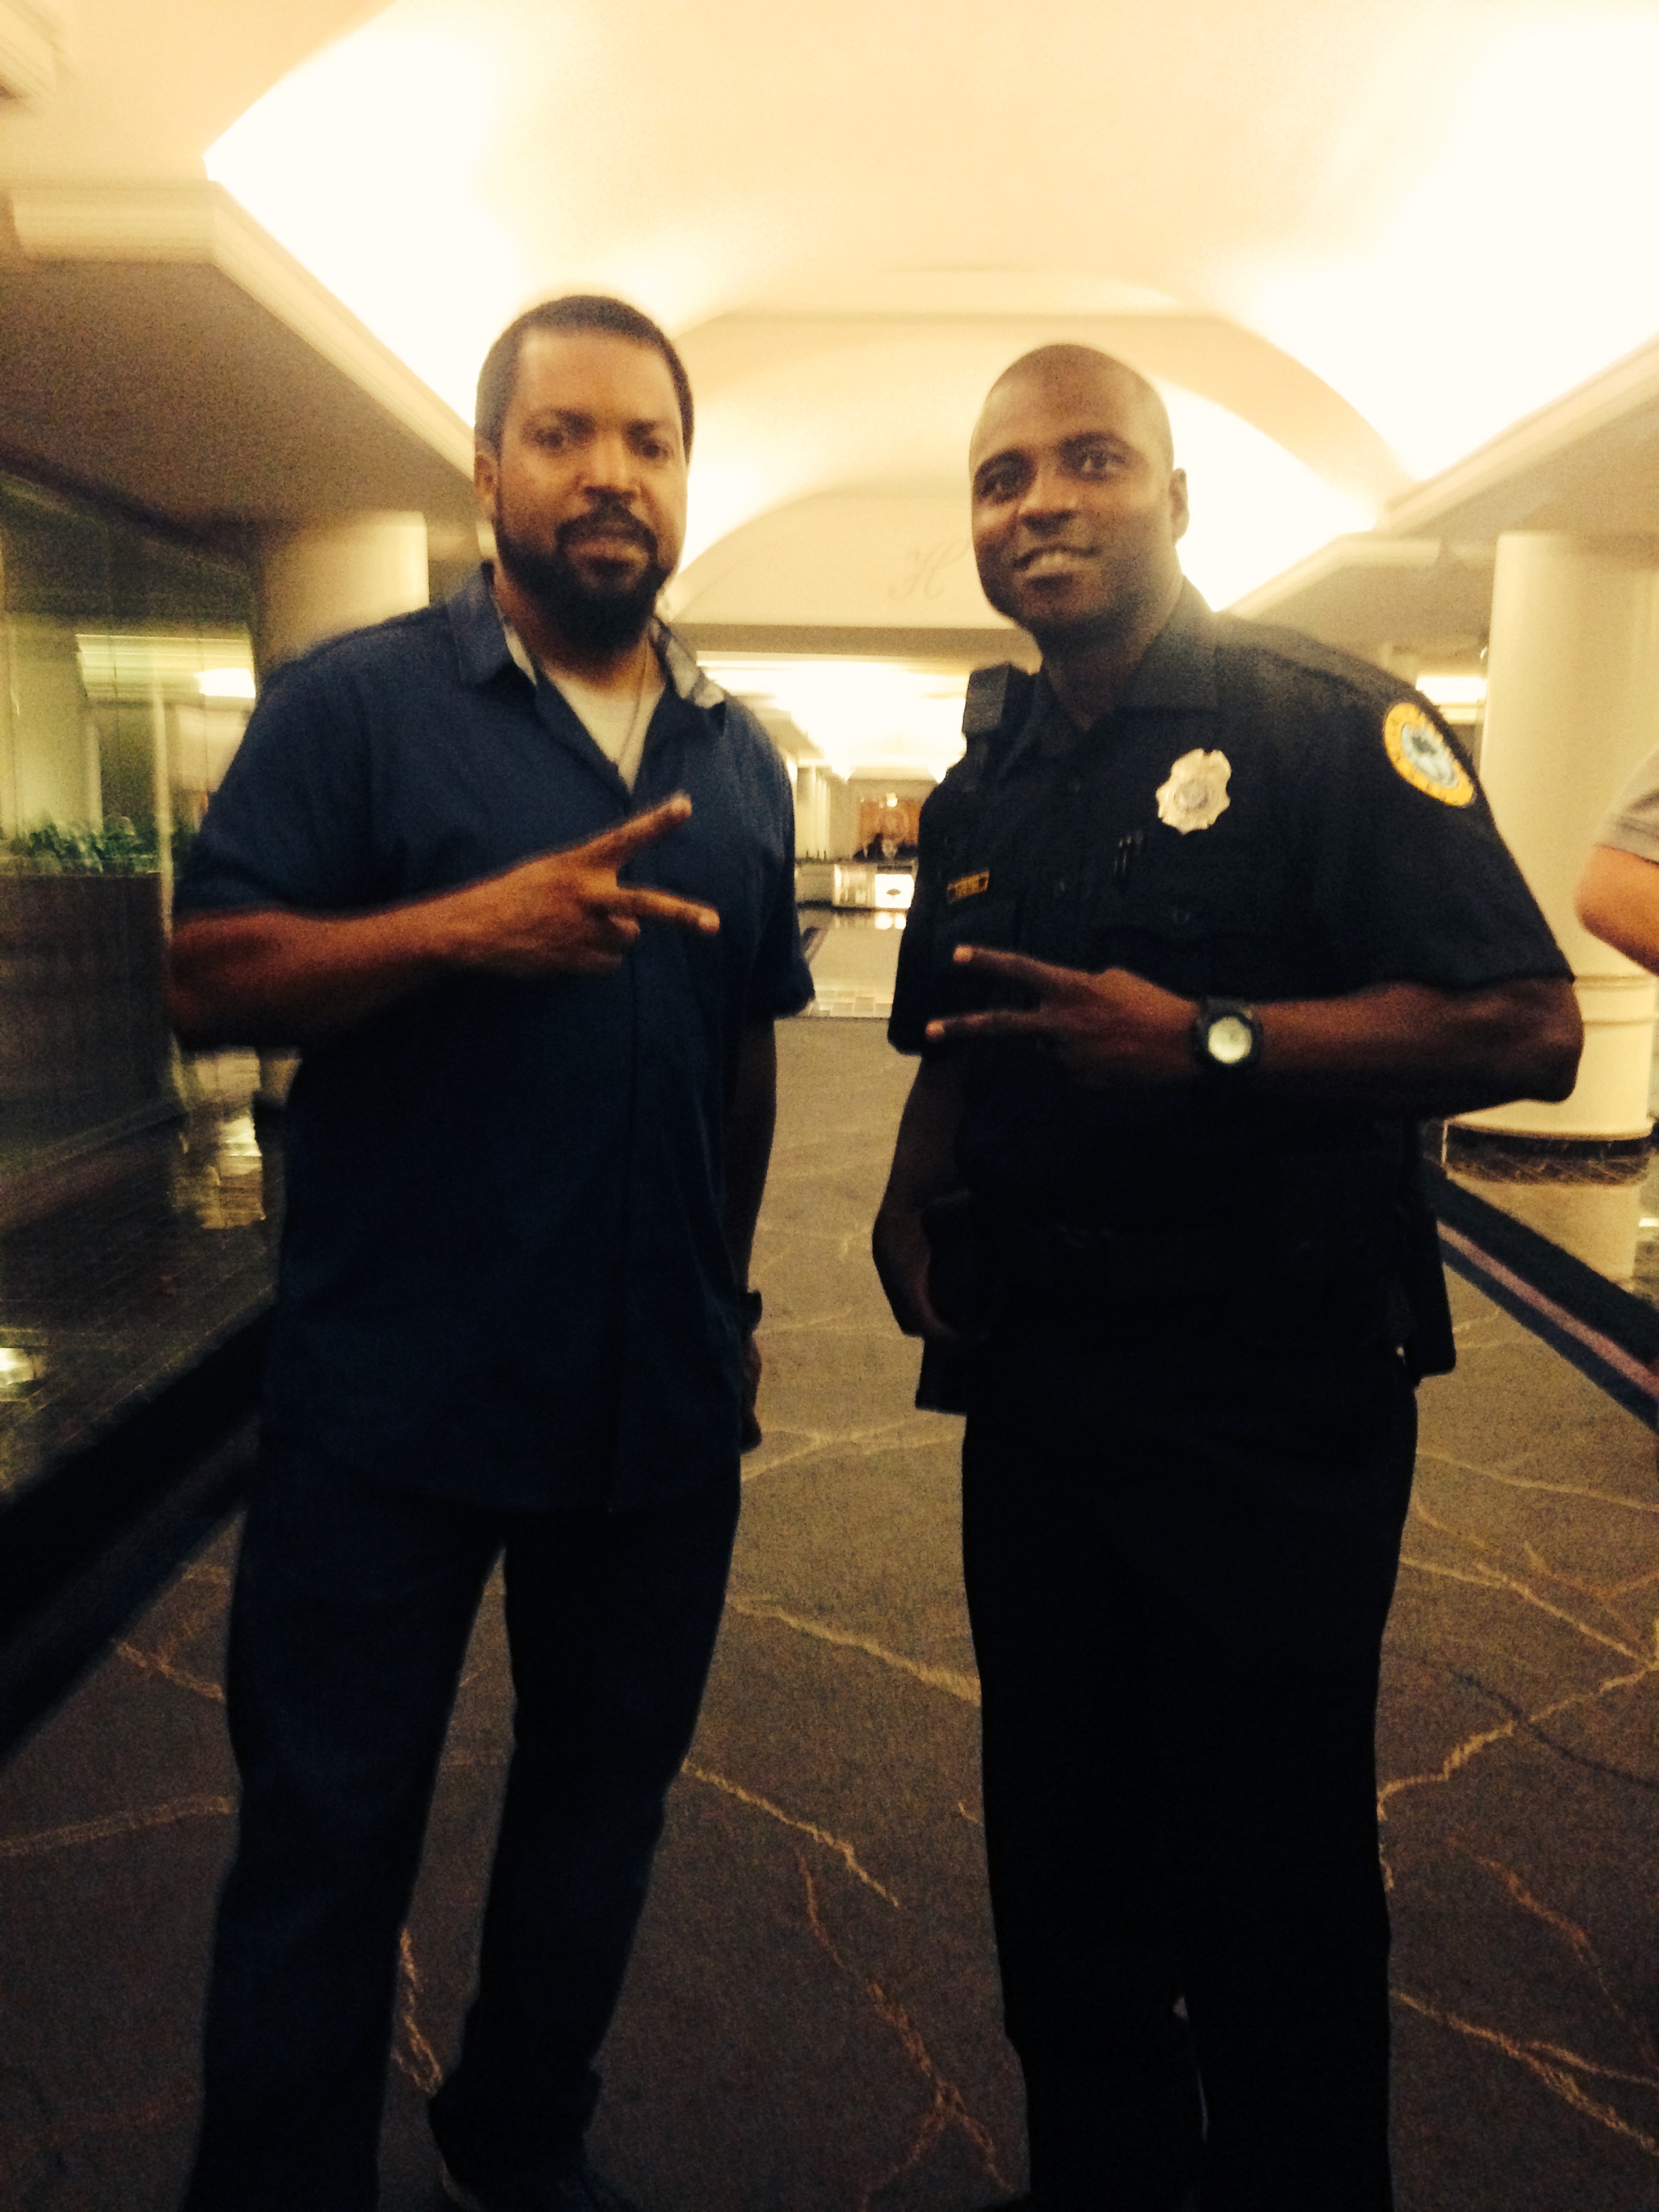 On set for Ride Along 2